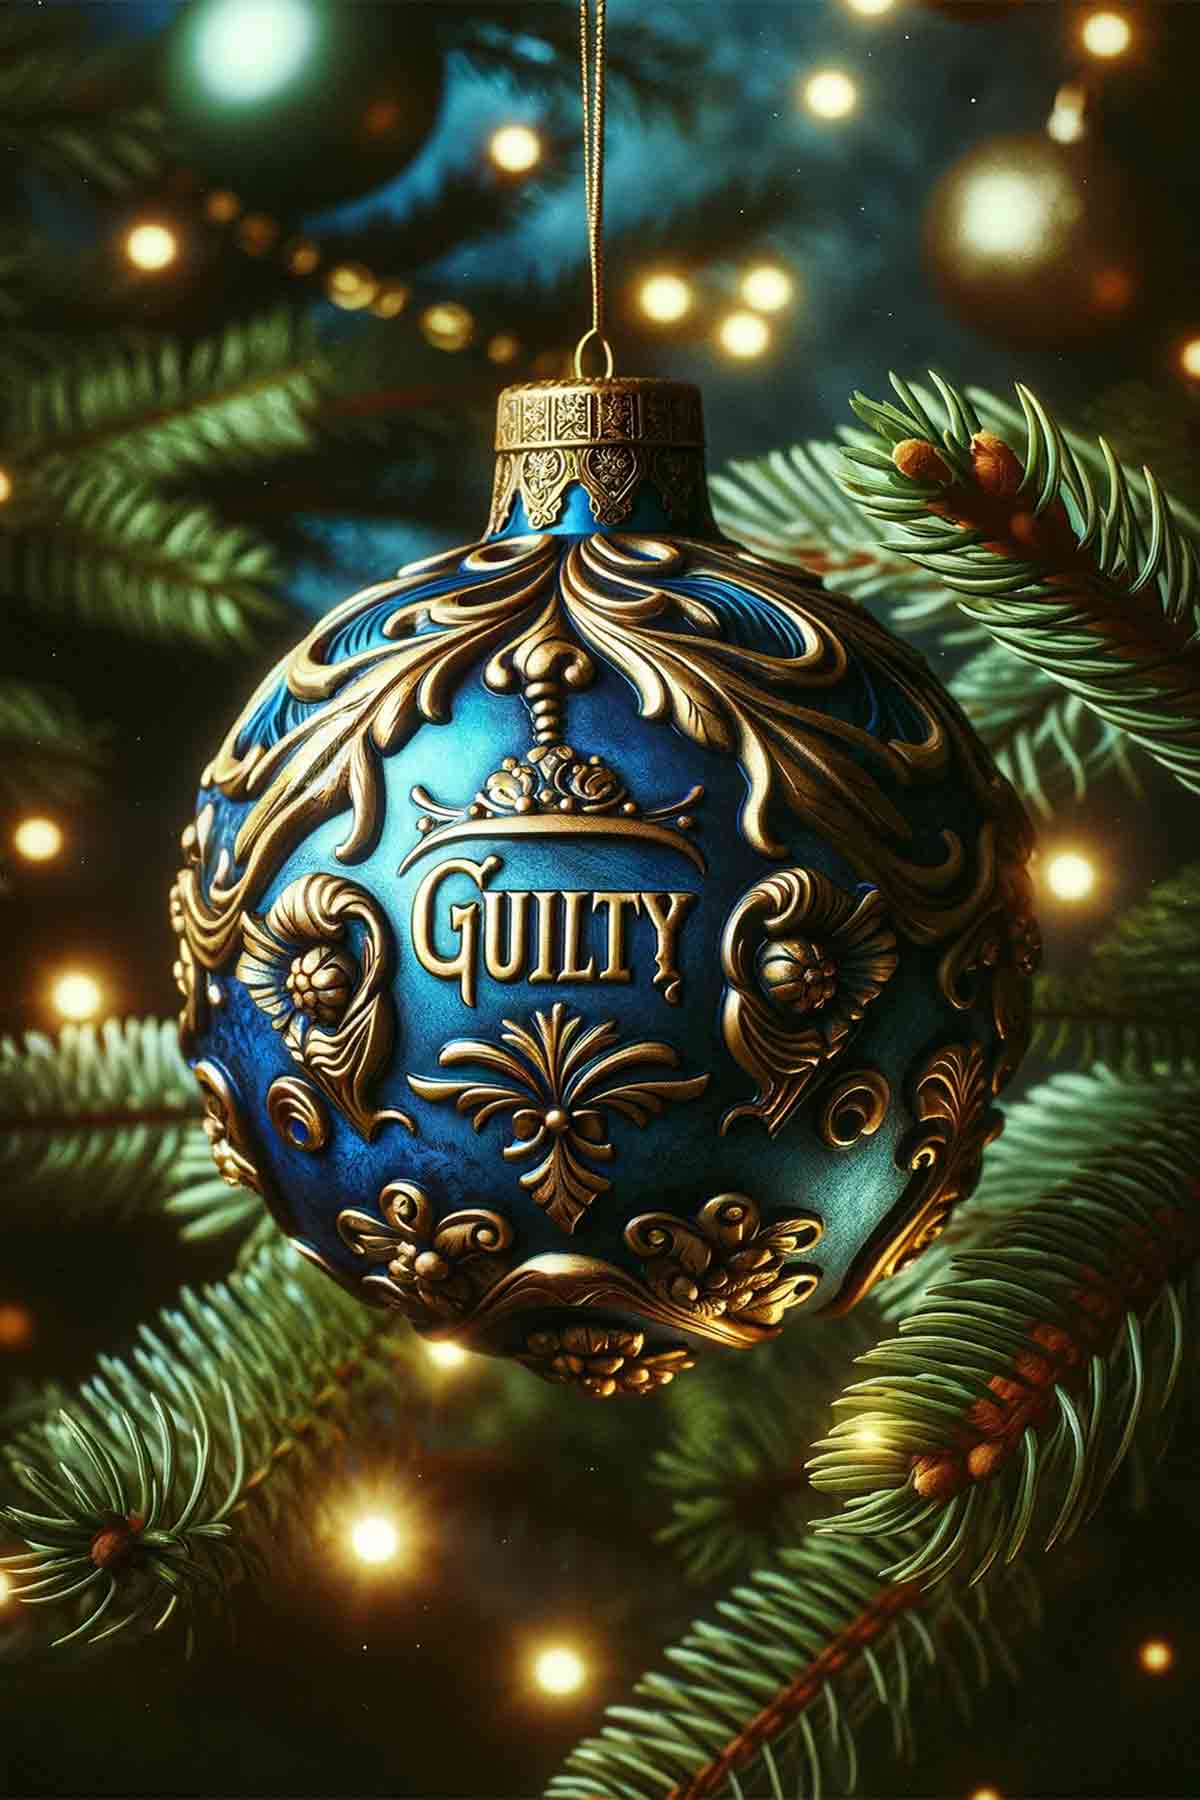 An ornate blue-and-gold Christmas ornament hanging from a Christmas tree branch.